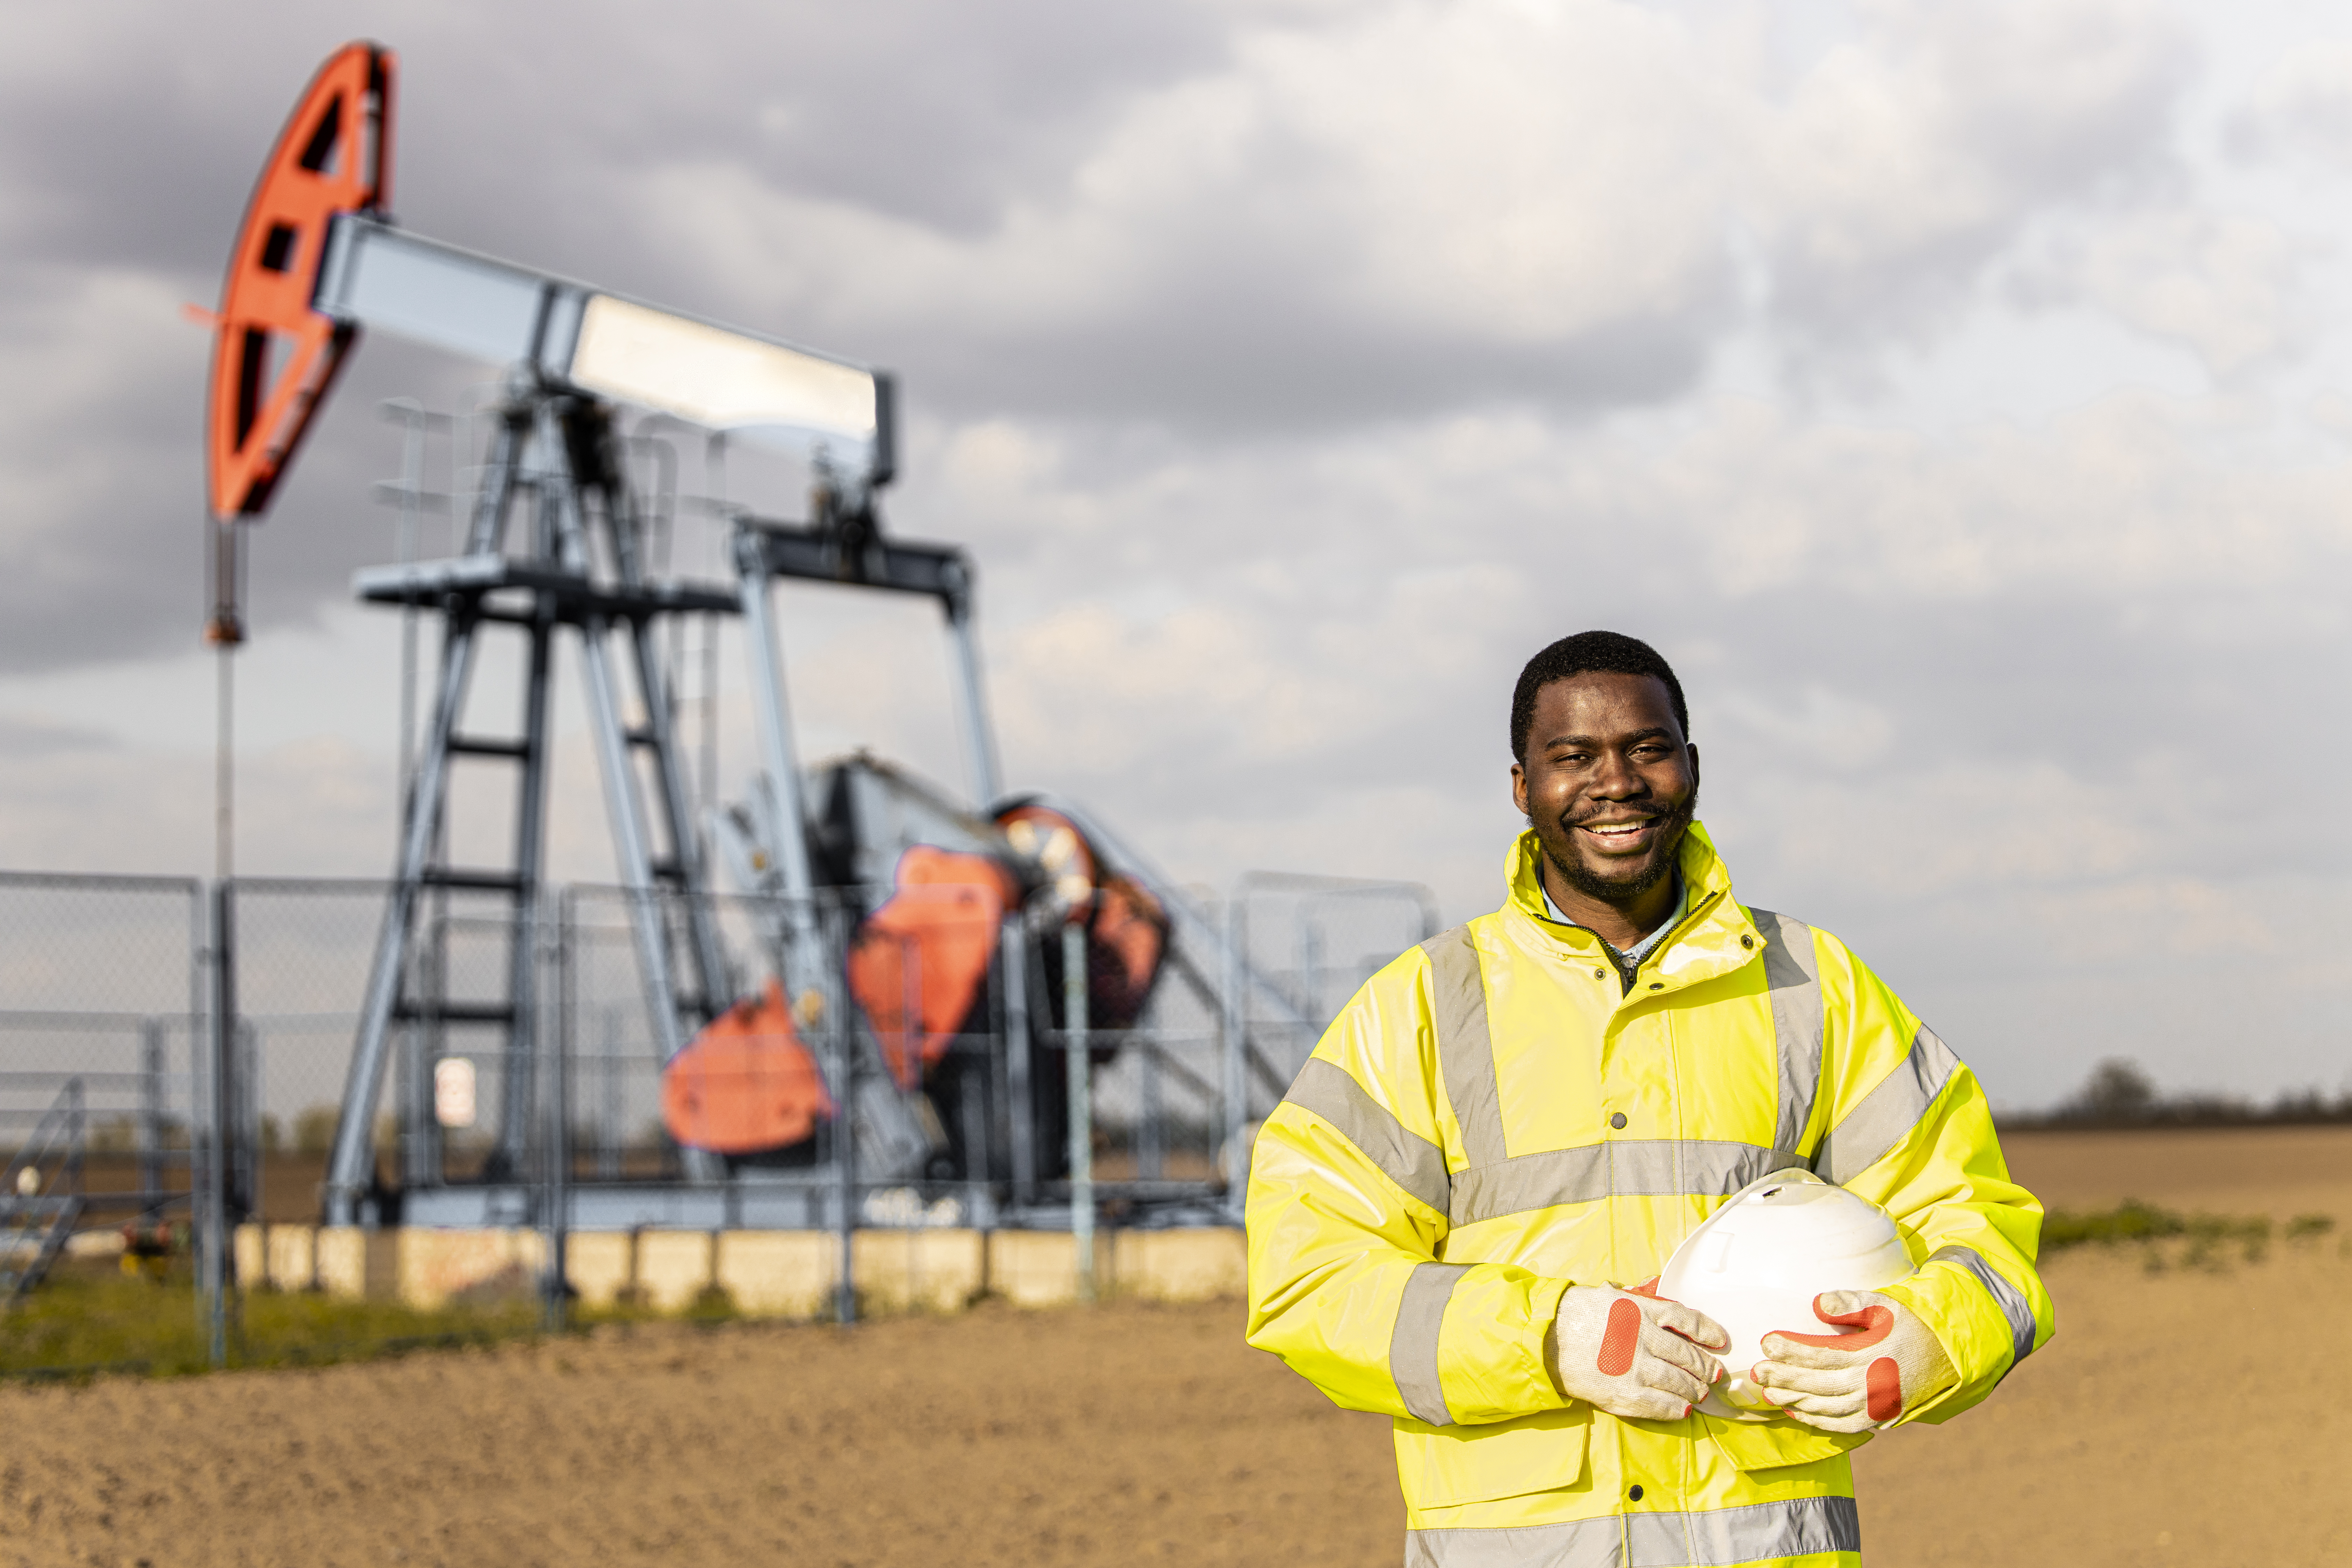 A field services worker stands near his oil field job.